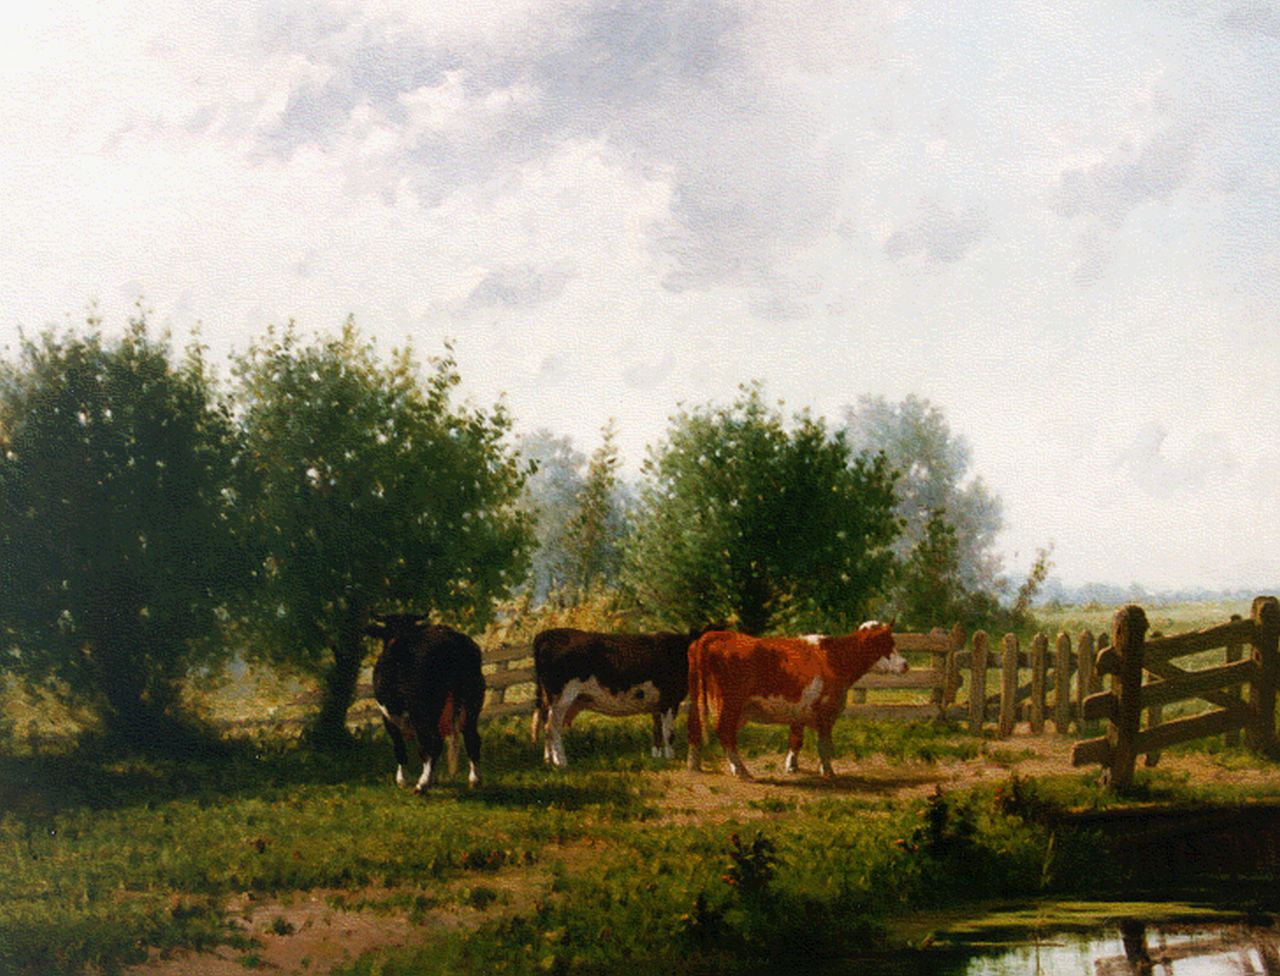 Westerbeek C.  | Cornelis Westerbeek, Cows by a fence, oil on panel 66.4 x 88.2 cm, signed l.l. and dated '84